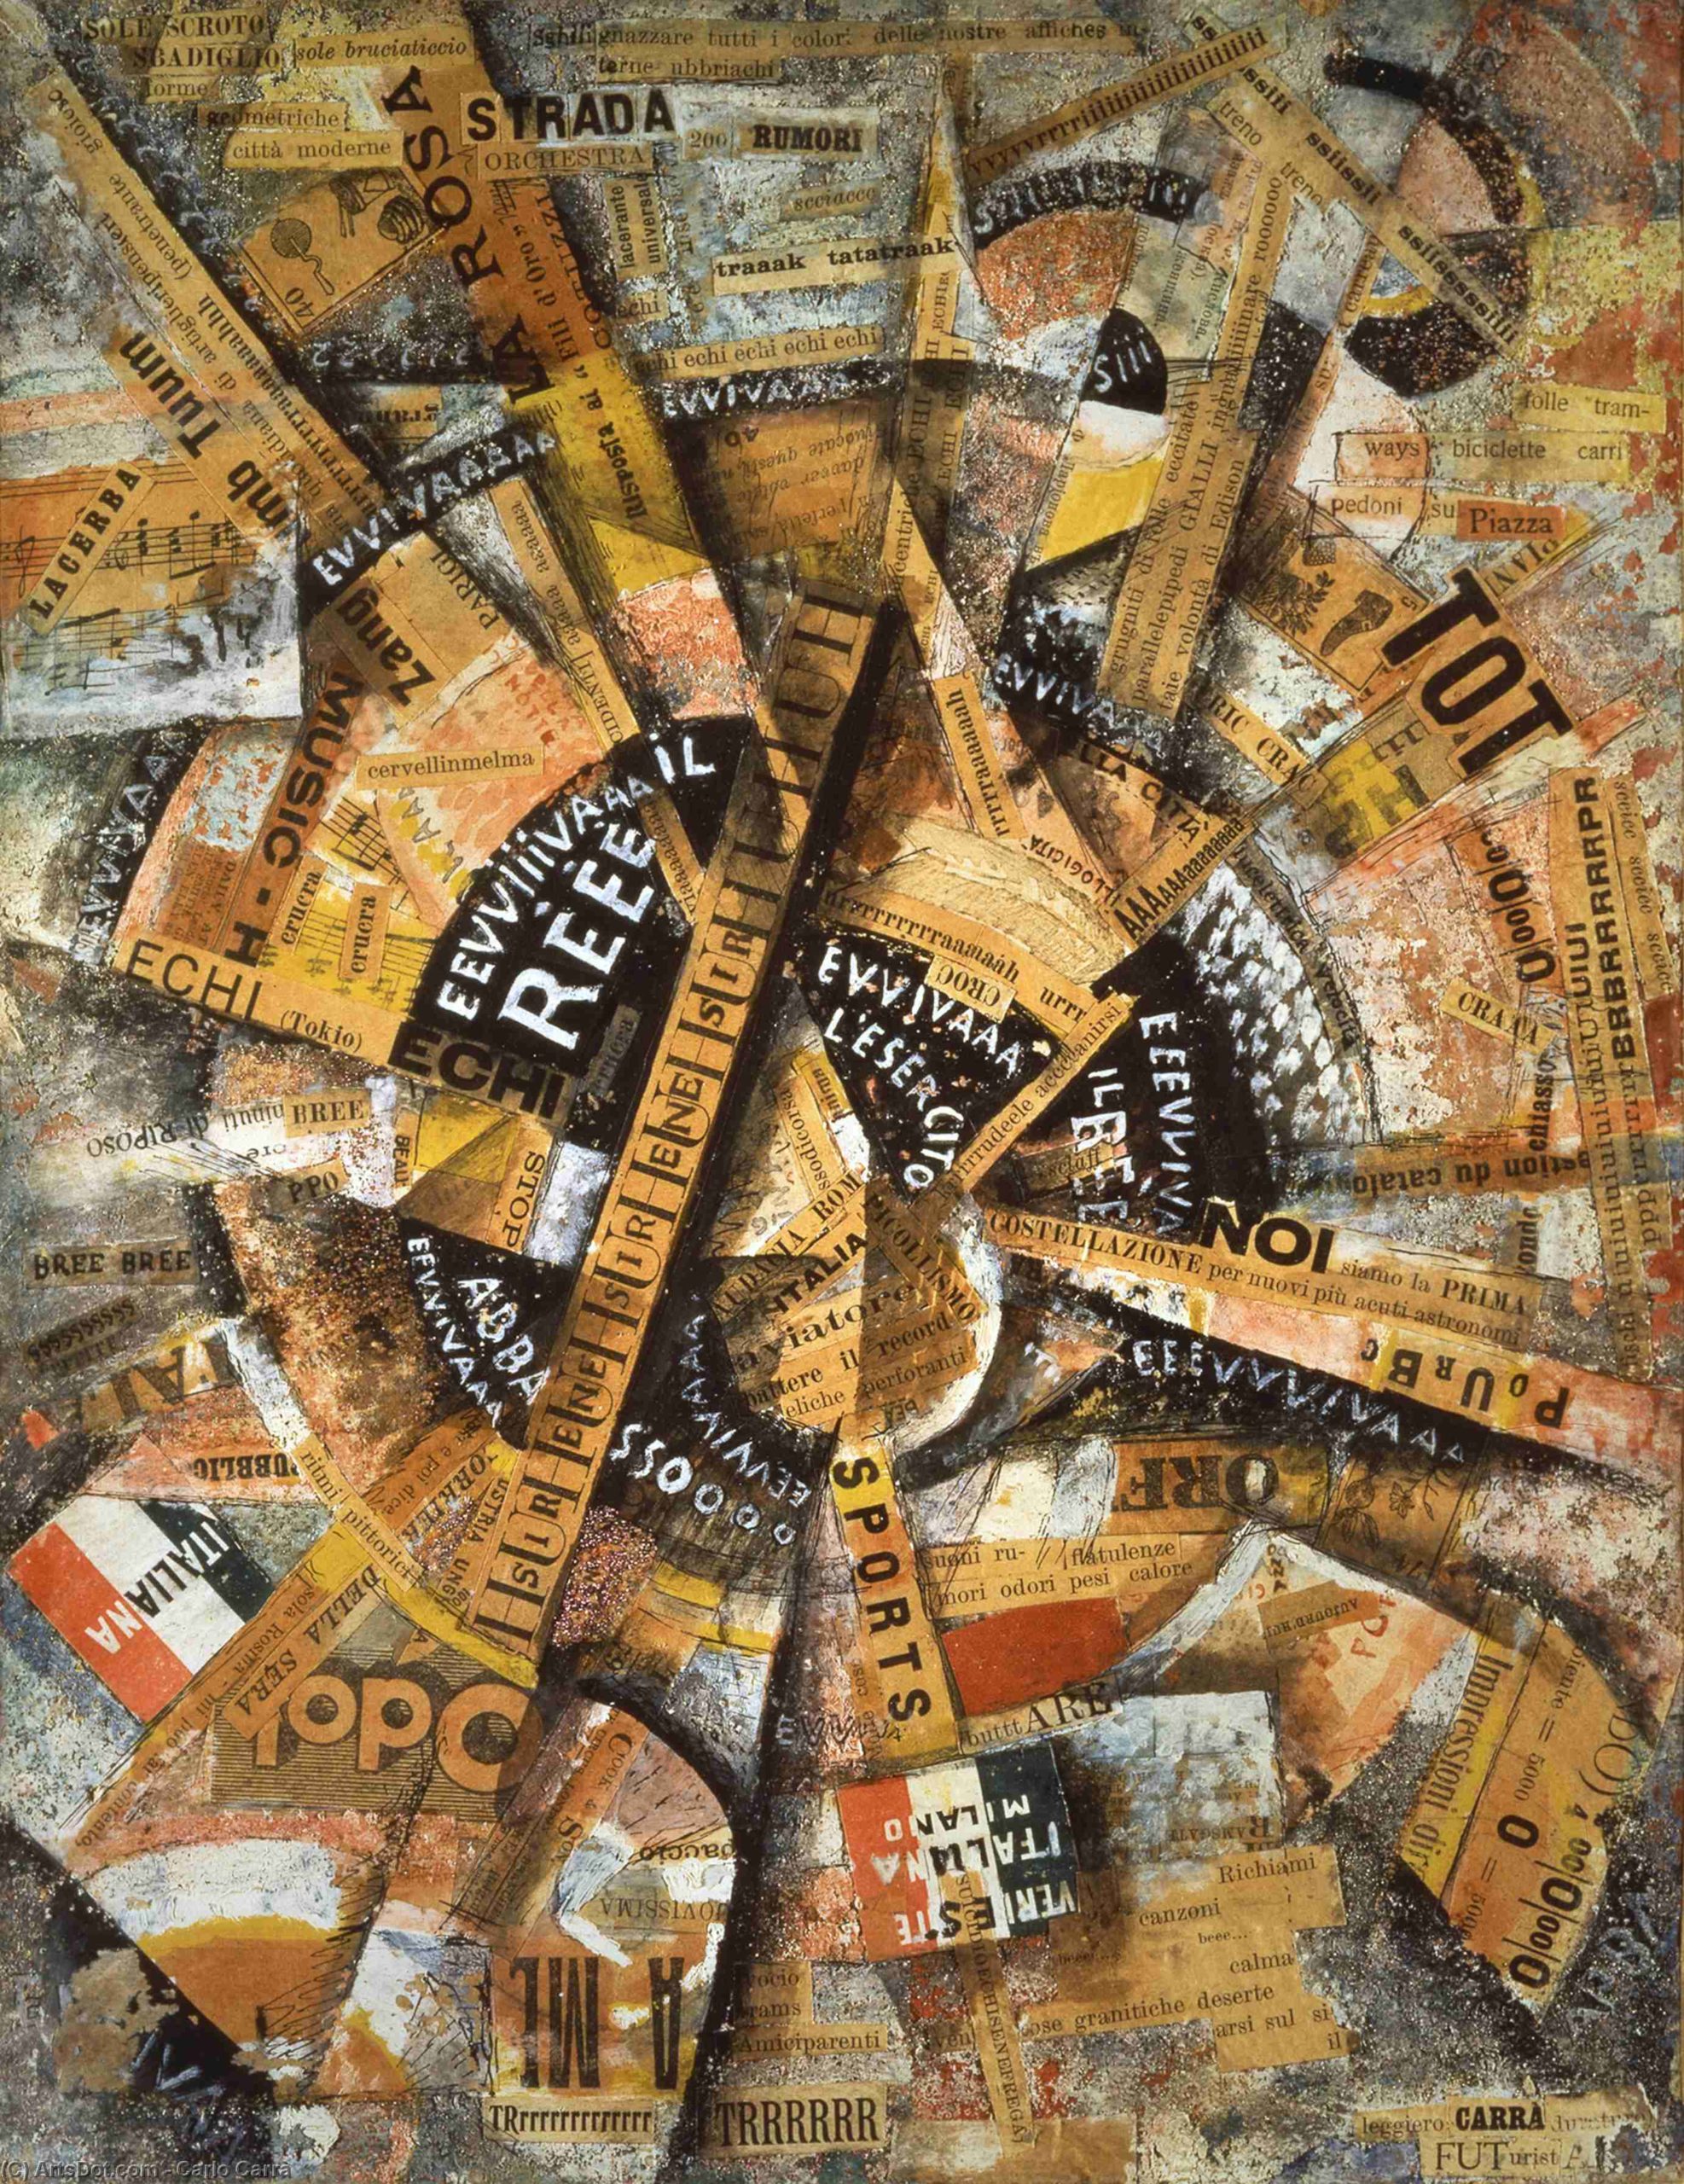 Carlo Carrà, Interventionist Demonstration (Patriotic Holiday - Free Word Painting), 1914, tempera, pen, mica powder, and collage on cardboard, 38.5 x 30 cm (Mattioli Collection, on long-term loan to Peggy Guggenheim Collection, Venice)